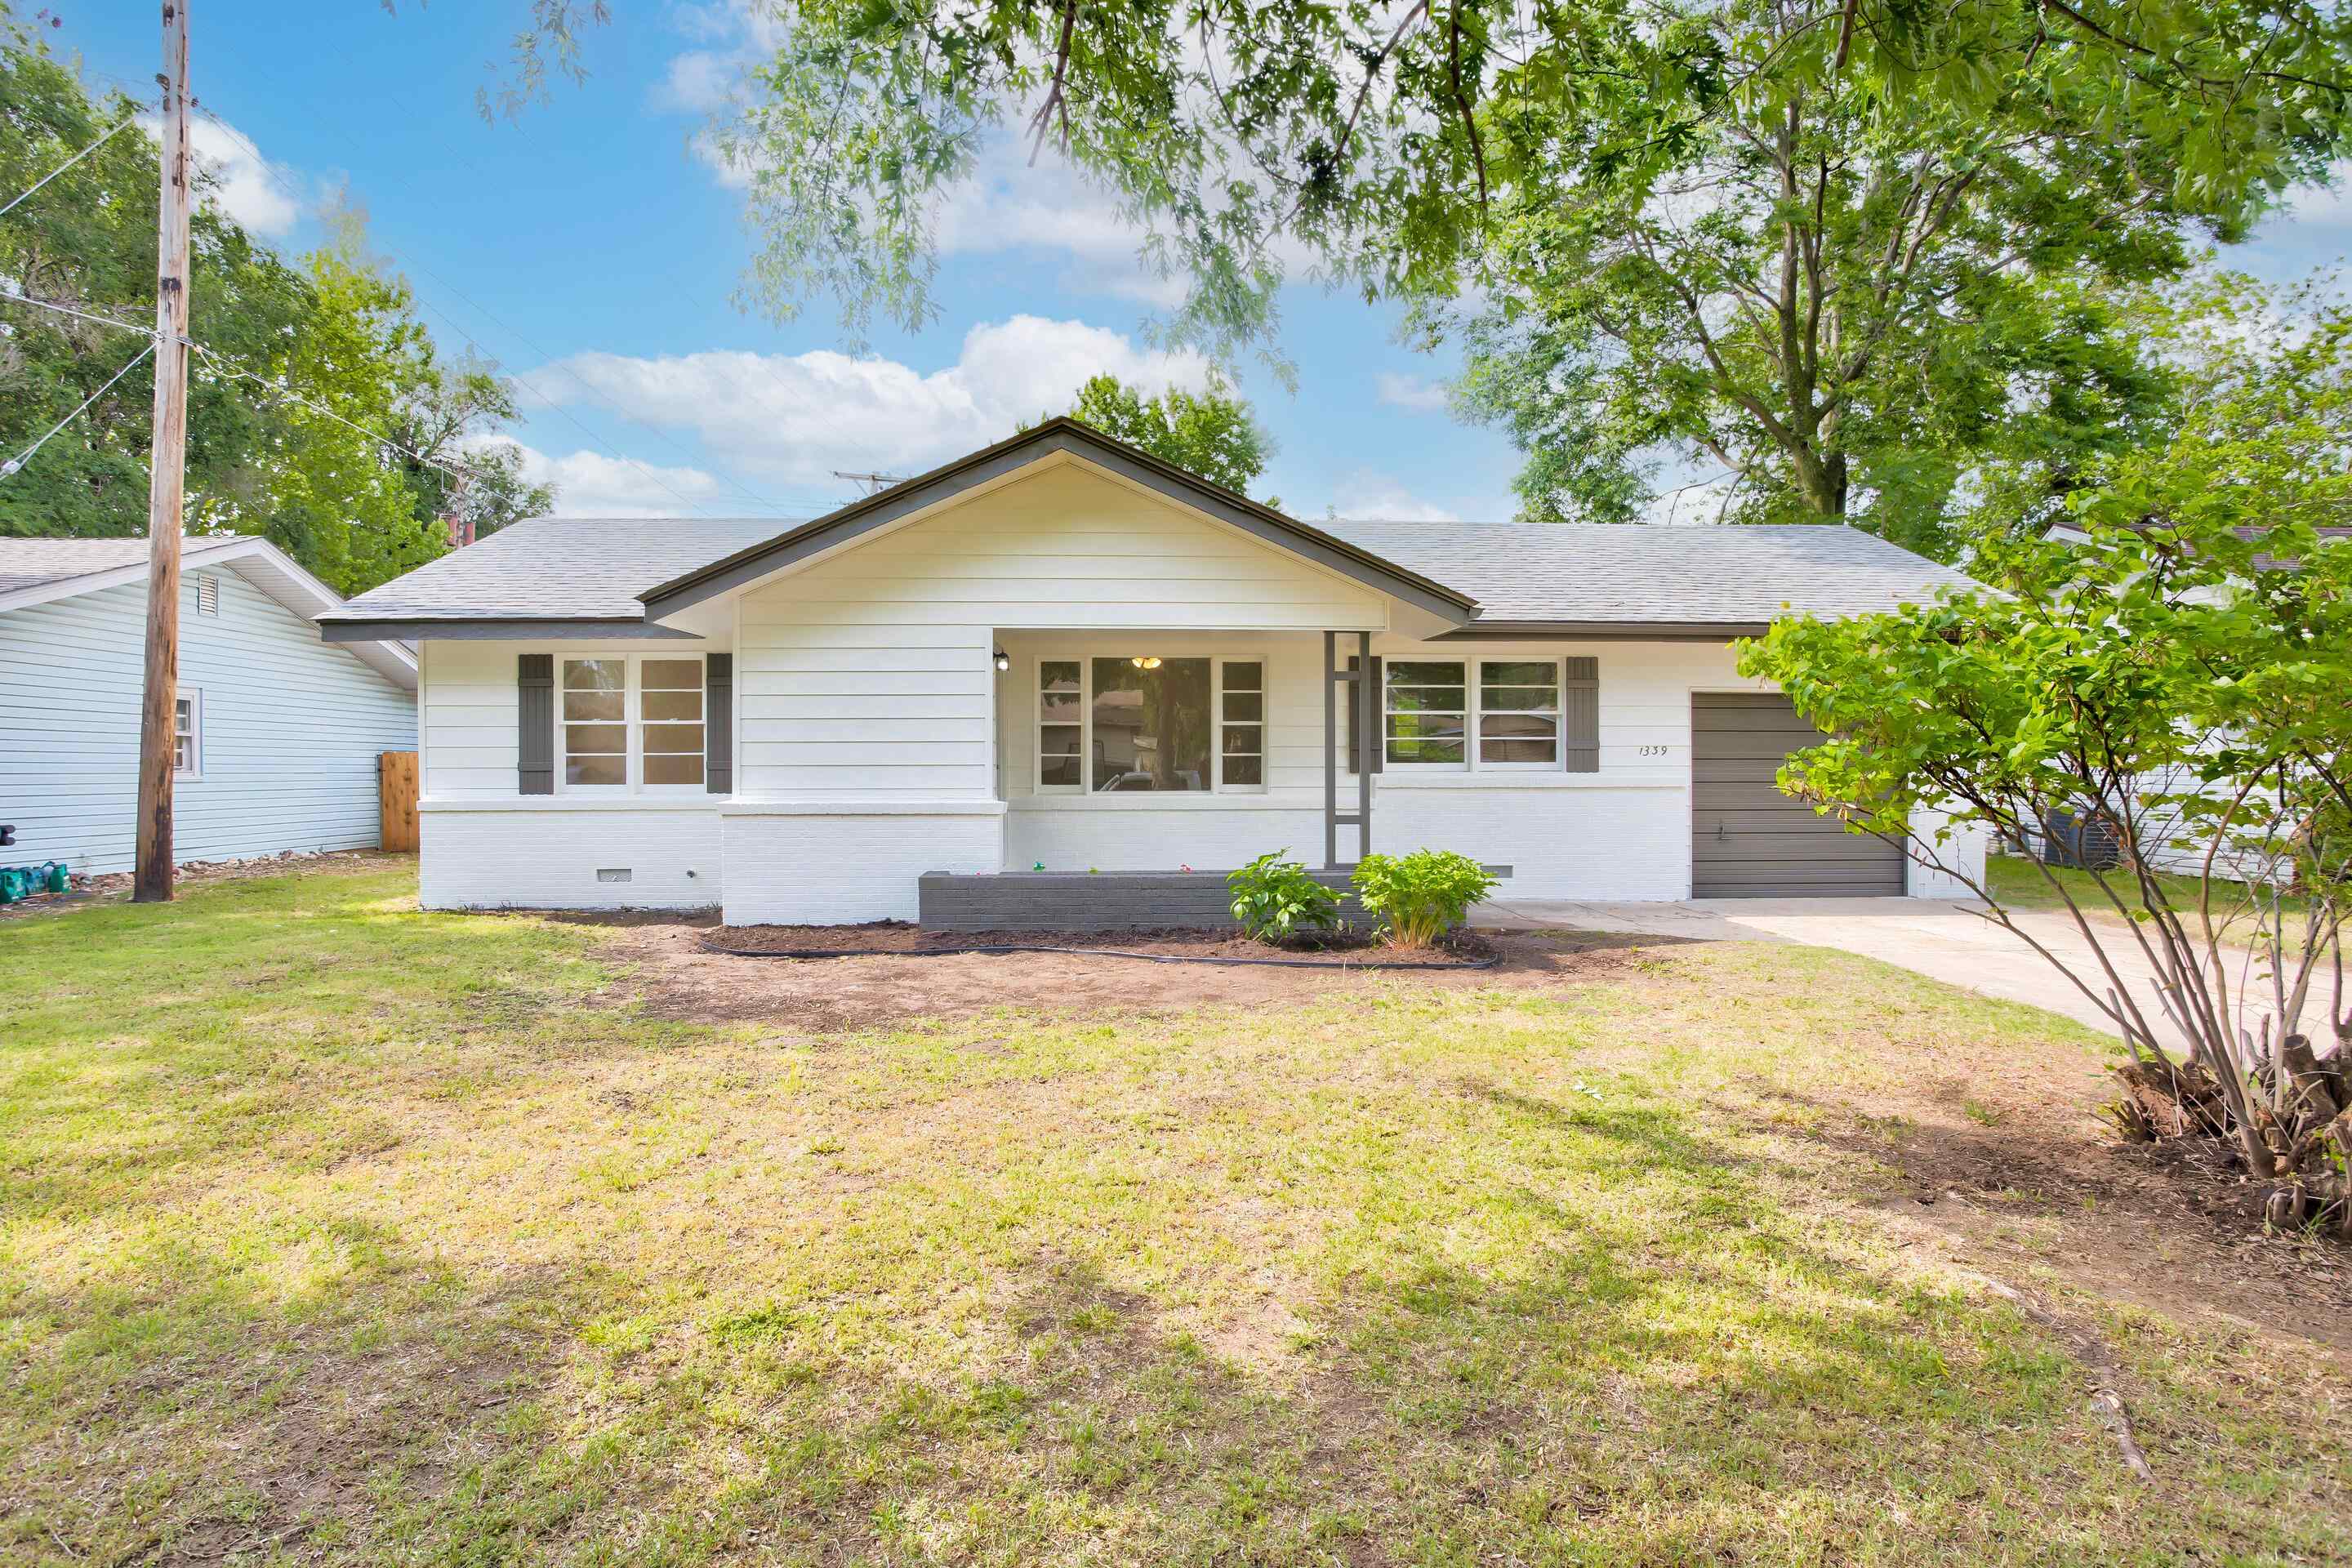 Welcome to this fully remodeled home that is sure to WOW! This home features 3 Bedrooms, 1 Bathroom,